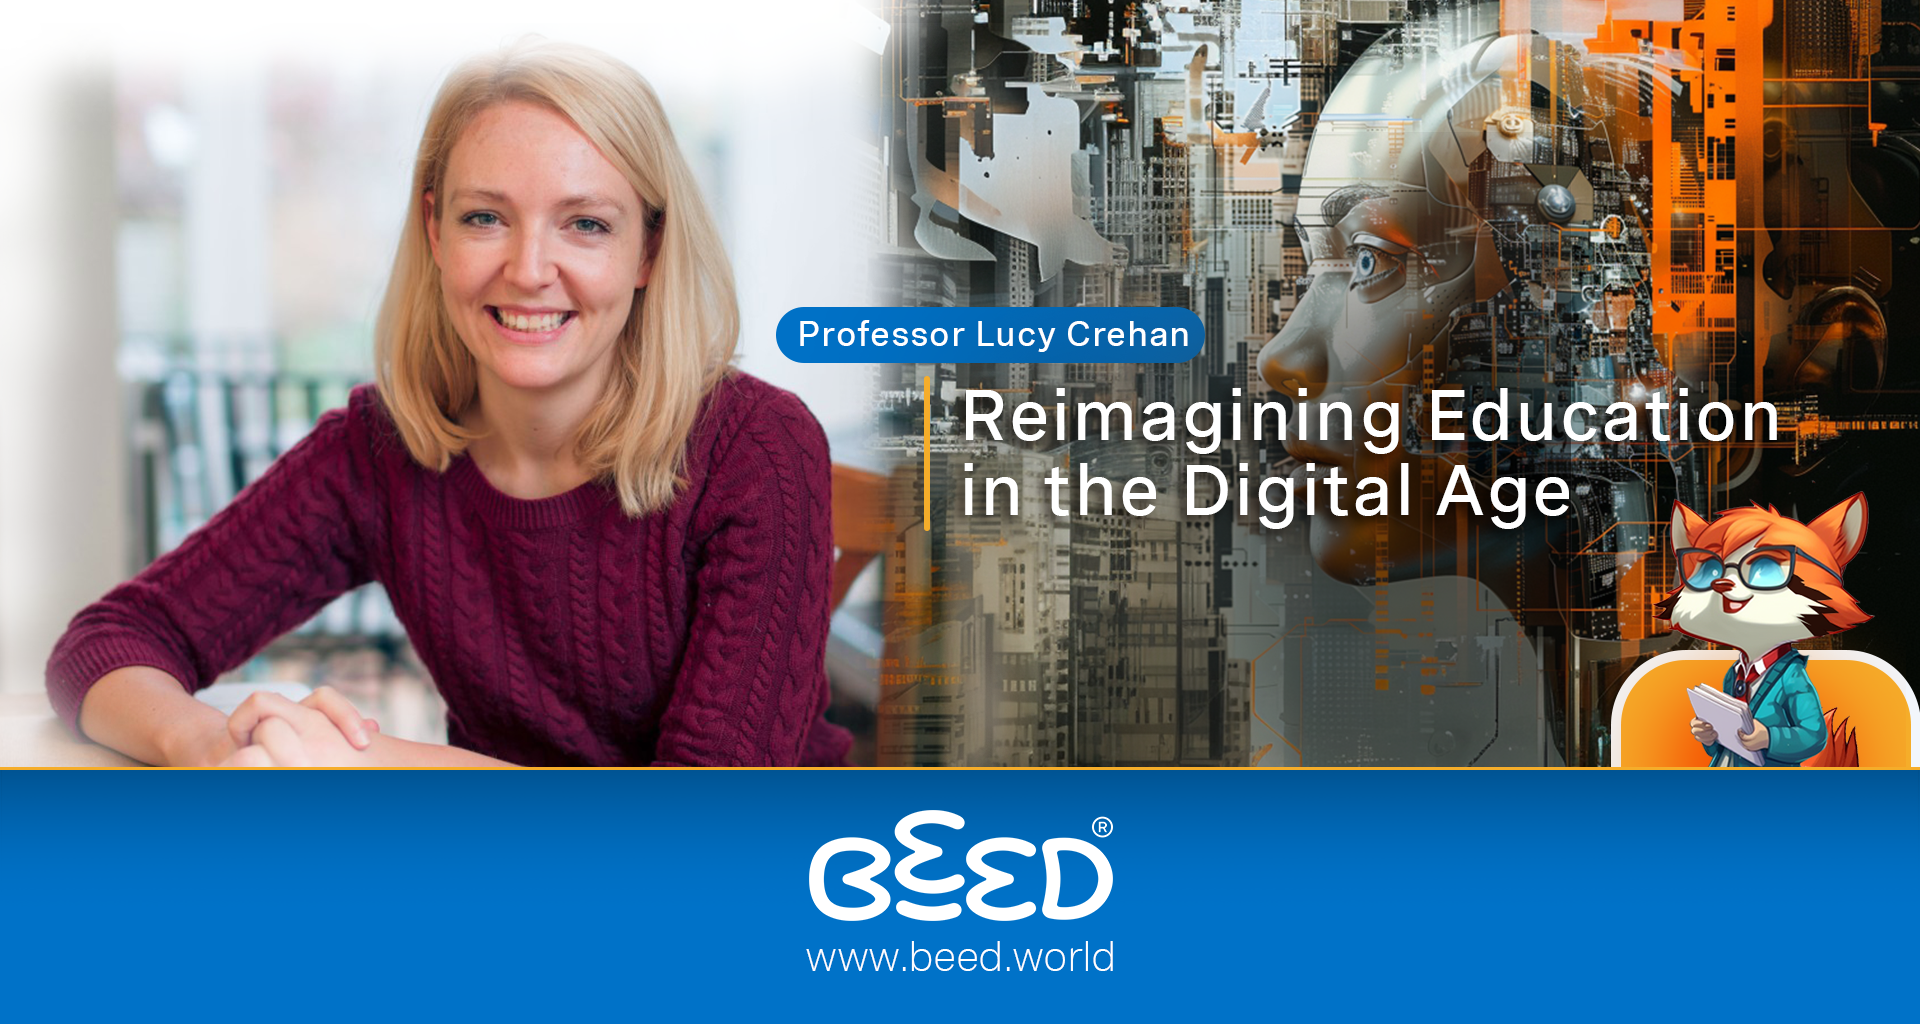 Professor Lucy Crehan and Reimagining Education in the Digital Age